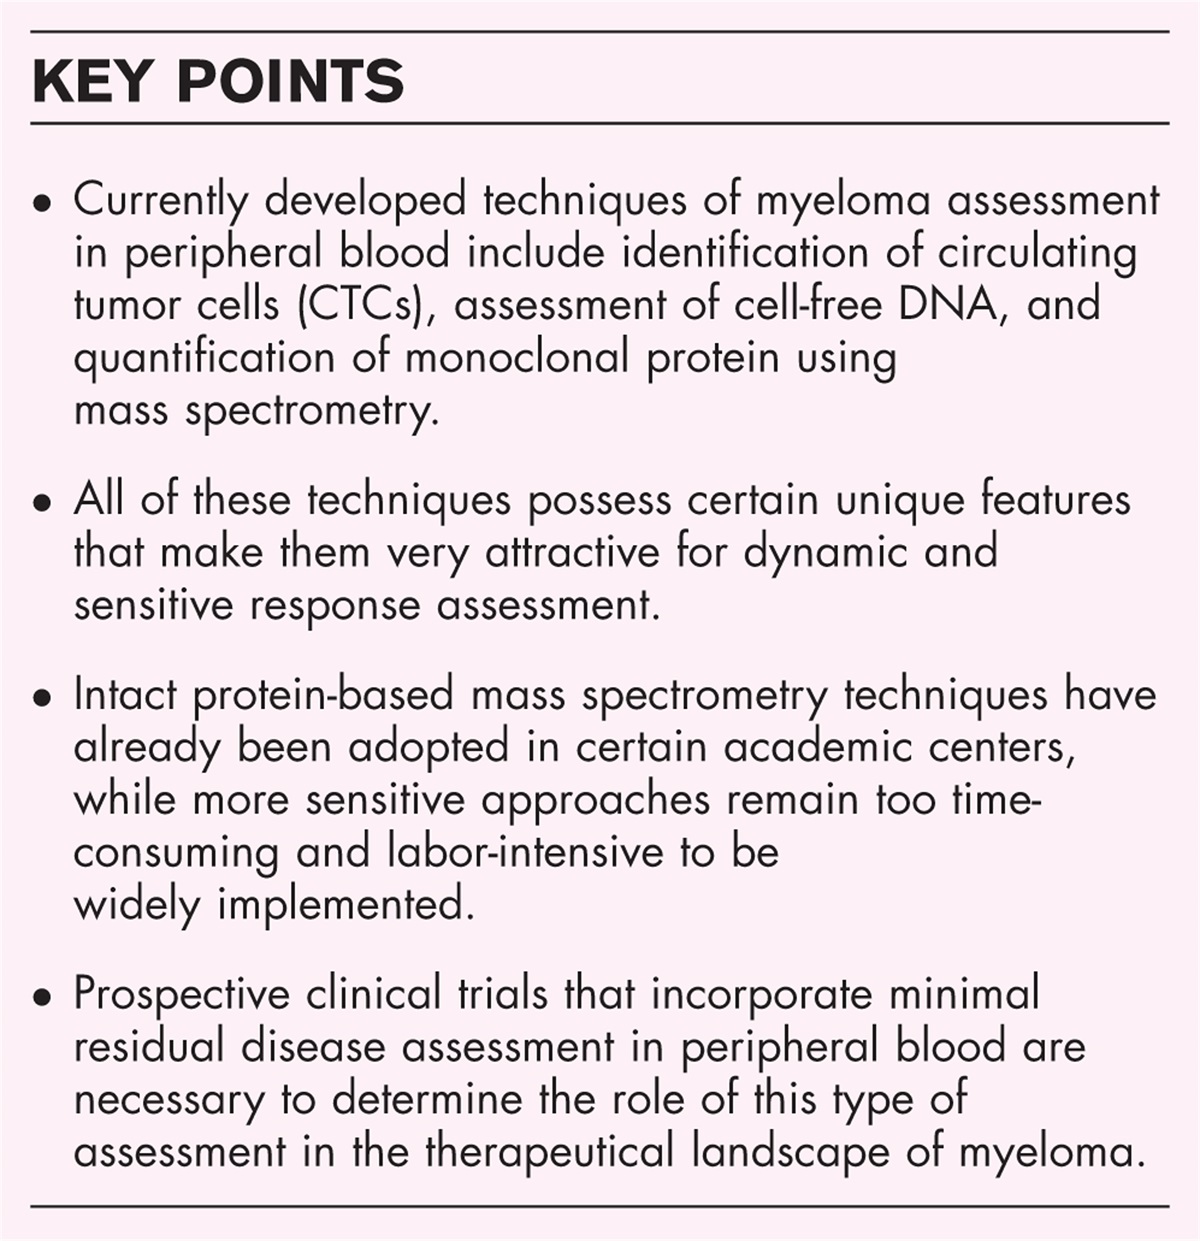 Measurable residual disease in peripheral blood in myeloma: dream or reality